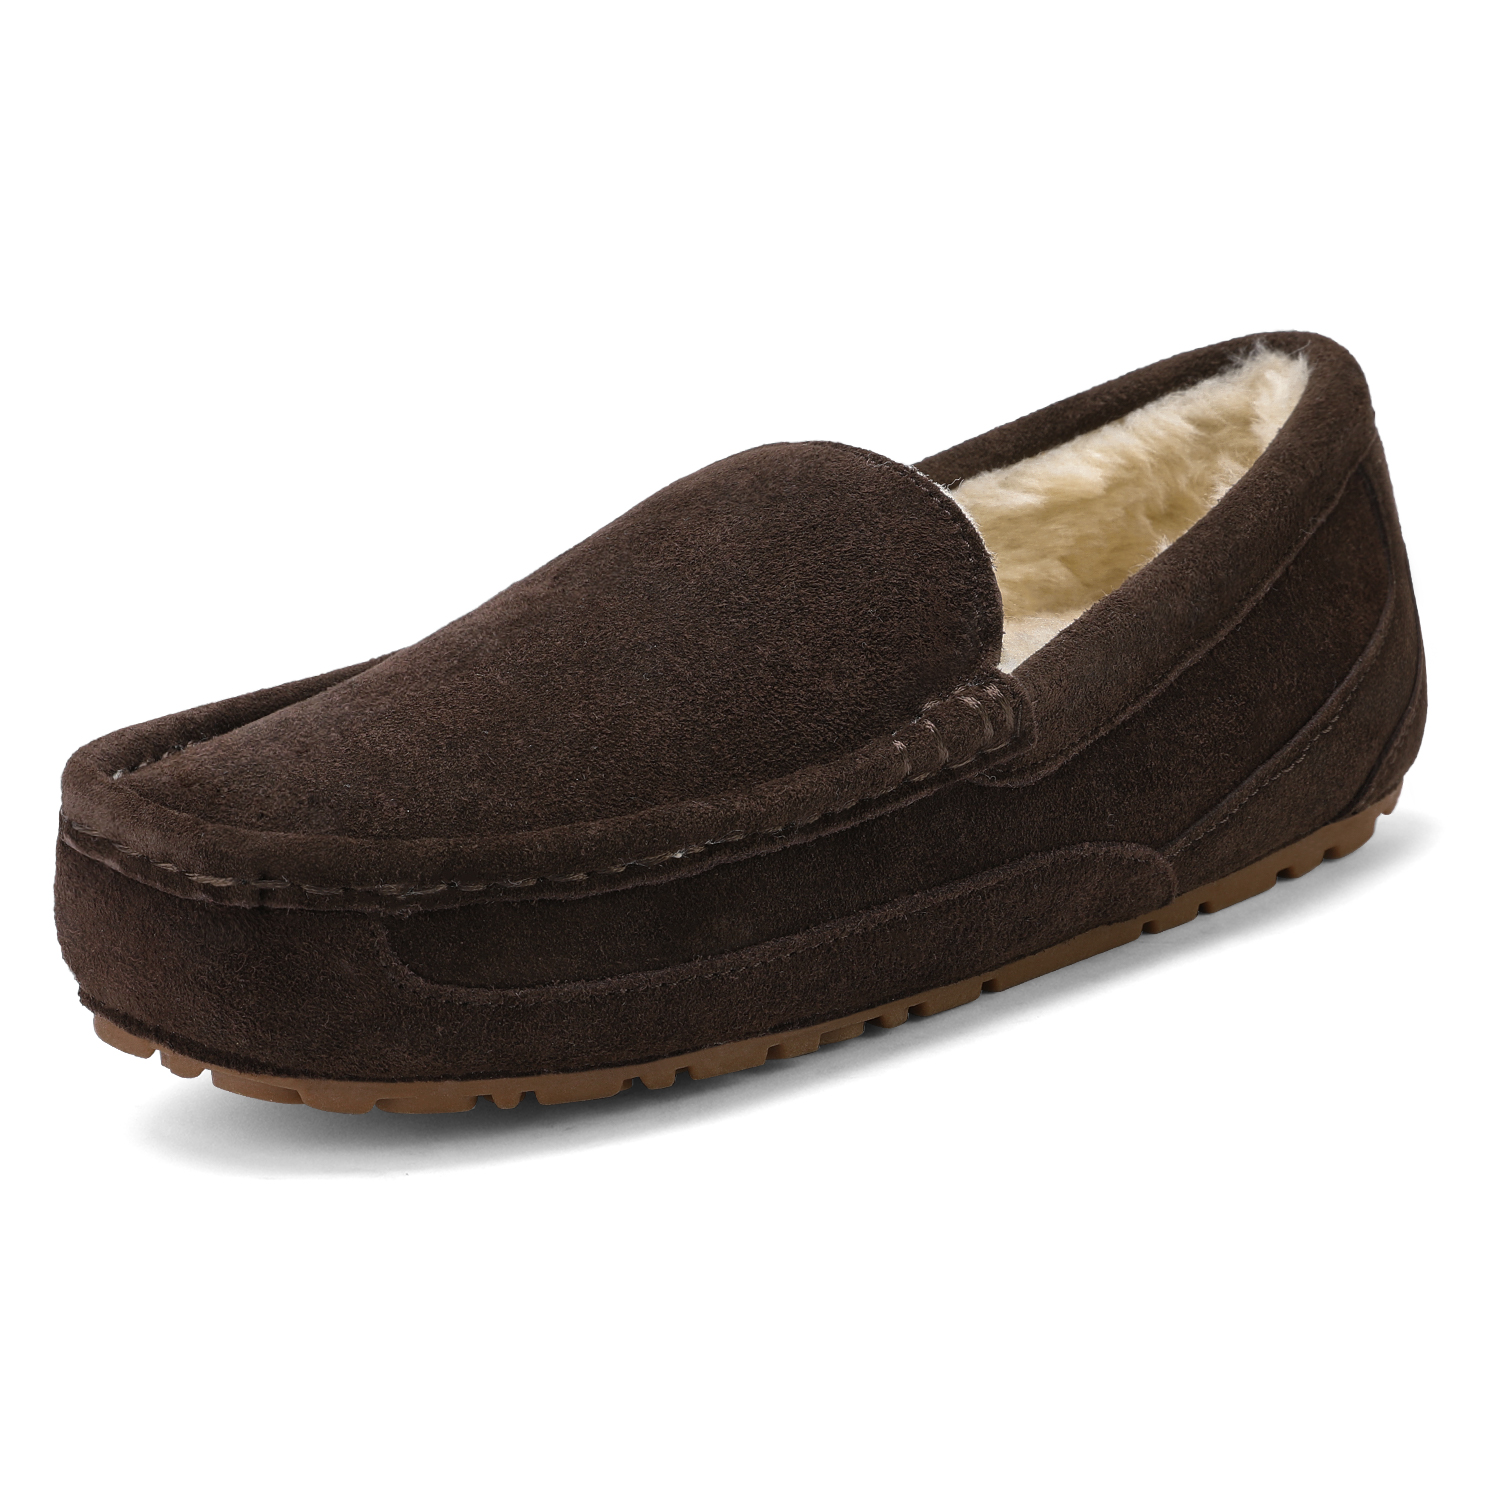 Dream Pairs New Soft Mens Au-Loafer Indoor Warm Moccasins Slippers Flats Shoes Au-Loafer-01 Brown Size 7 - image 1 of 4